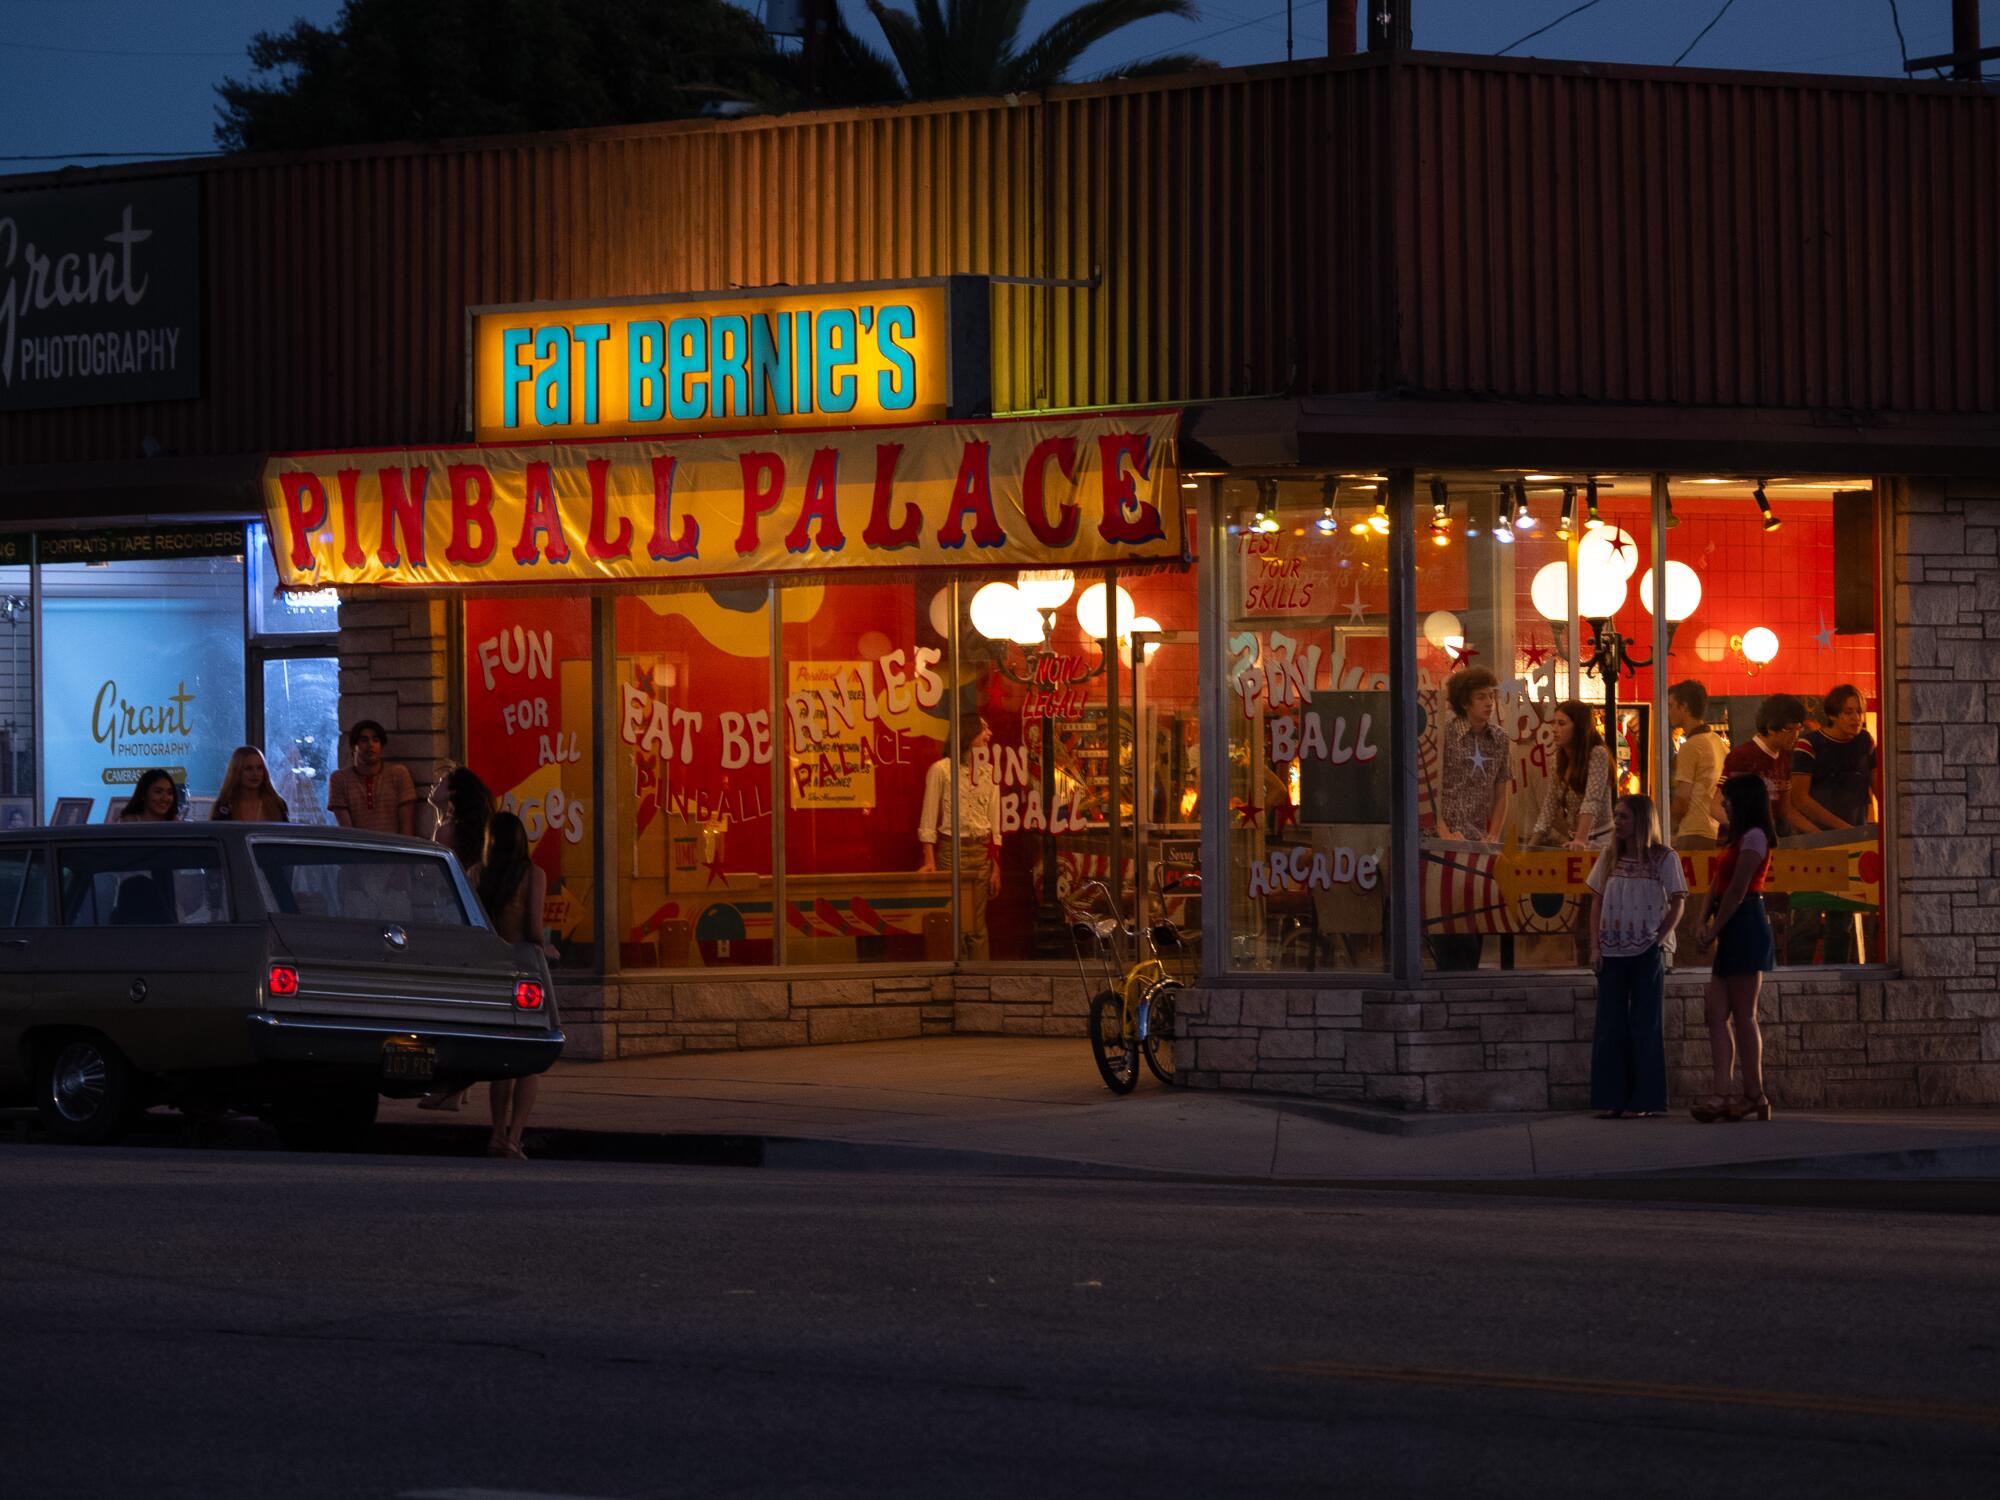 The street scene outside a pinball arcade in "Licorice Pizza."